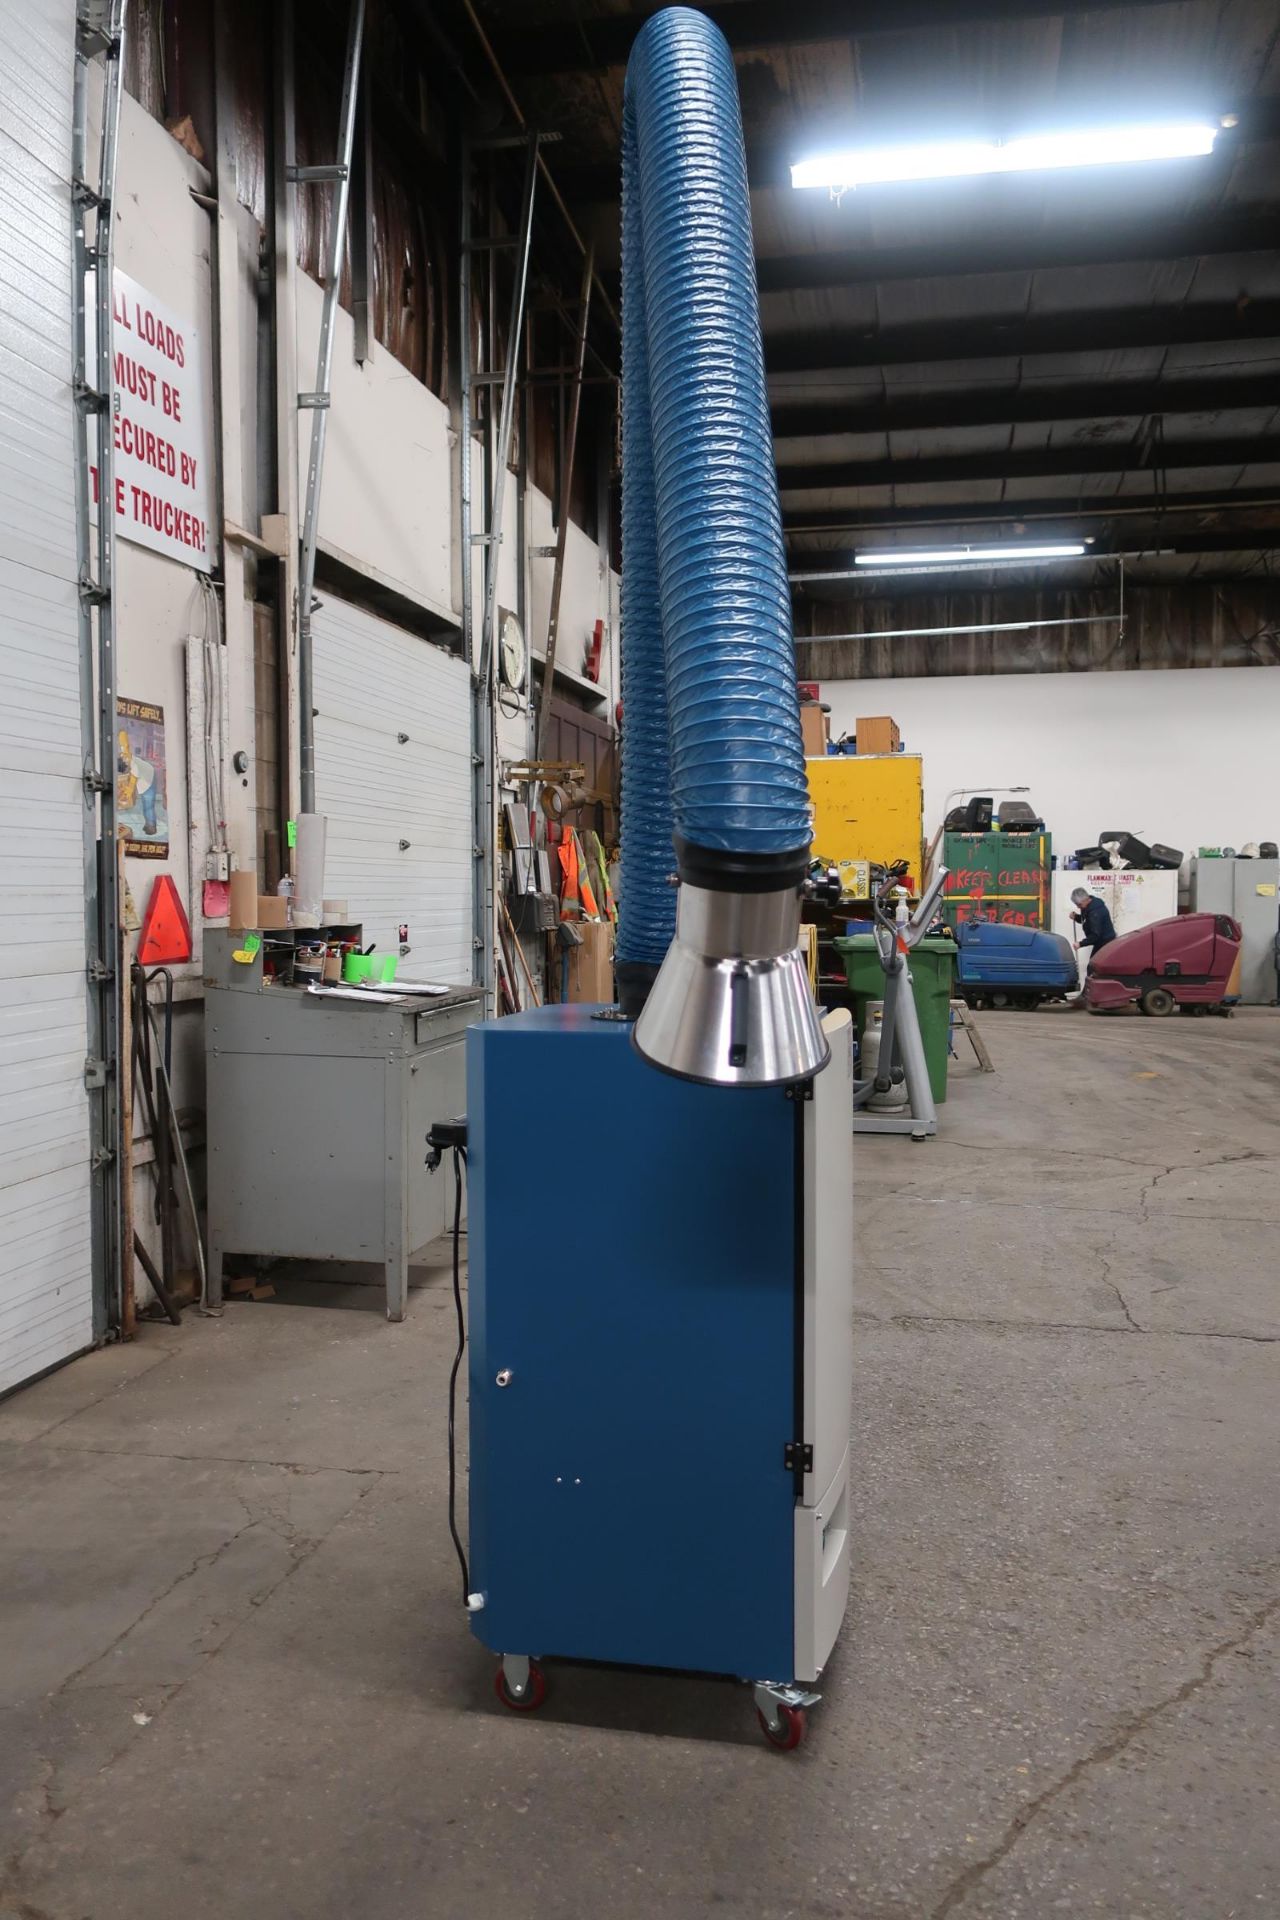 Purex Fume Extractor with long reach snorkel arm - 120V single phase - MINT & UNUSED - CLEAN FILTER - Image 3 of 3